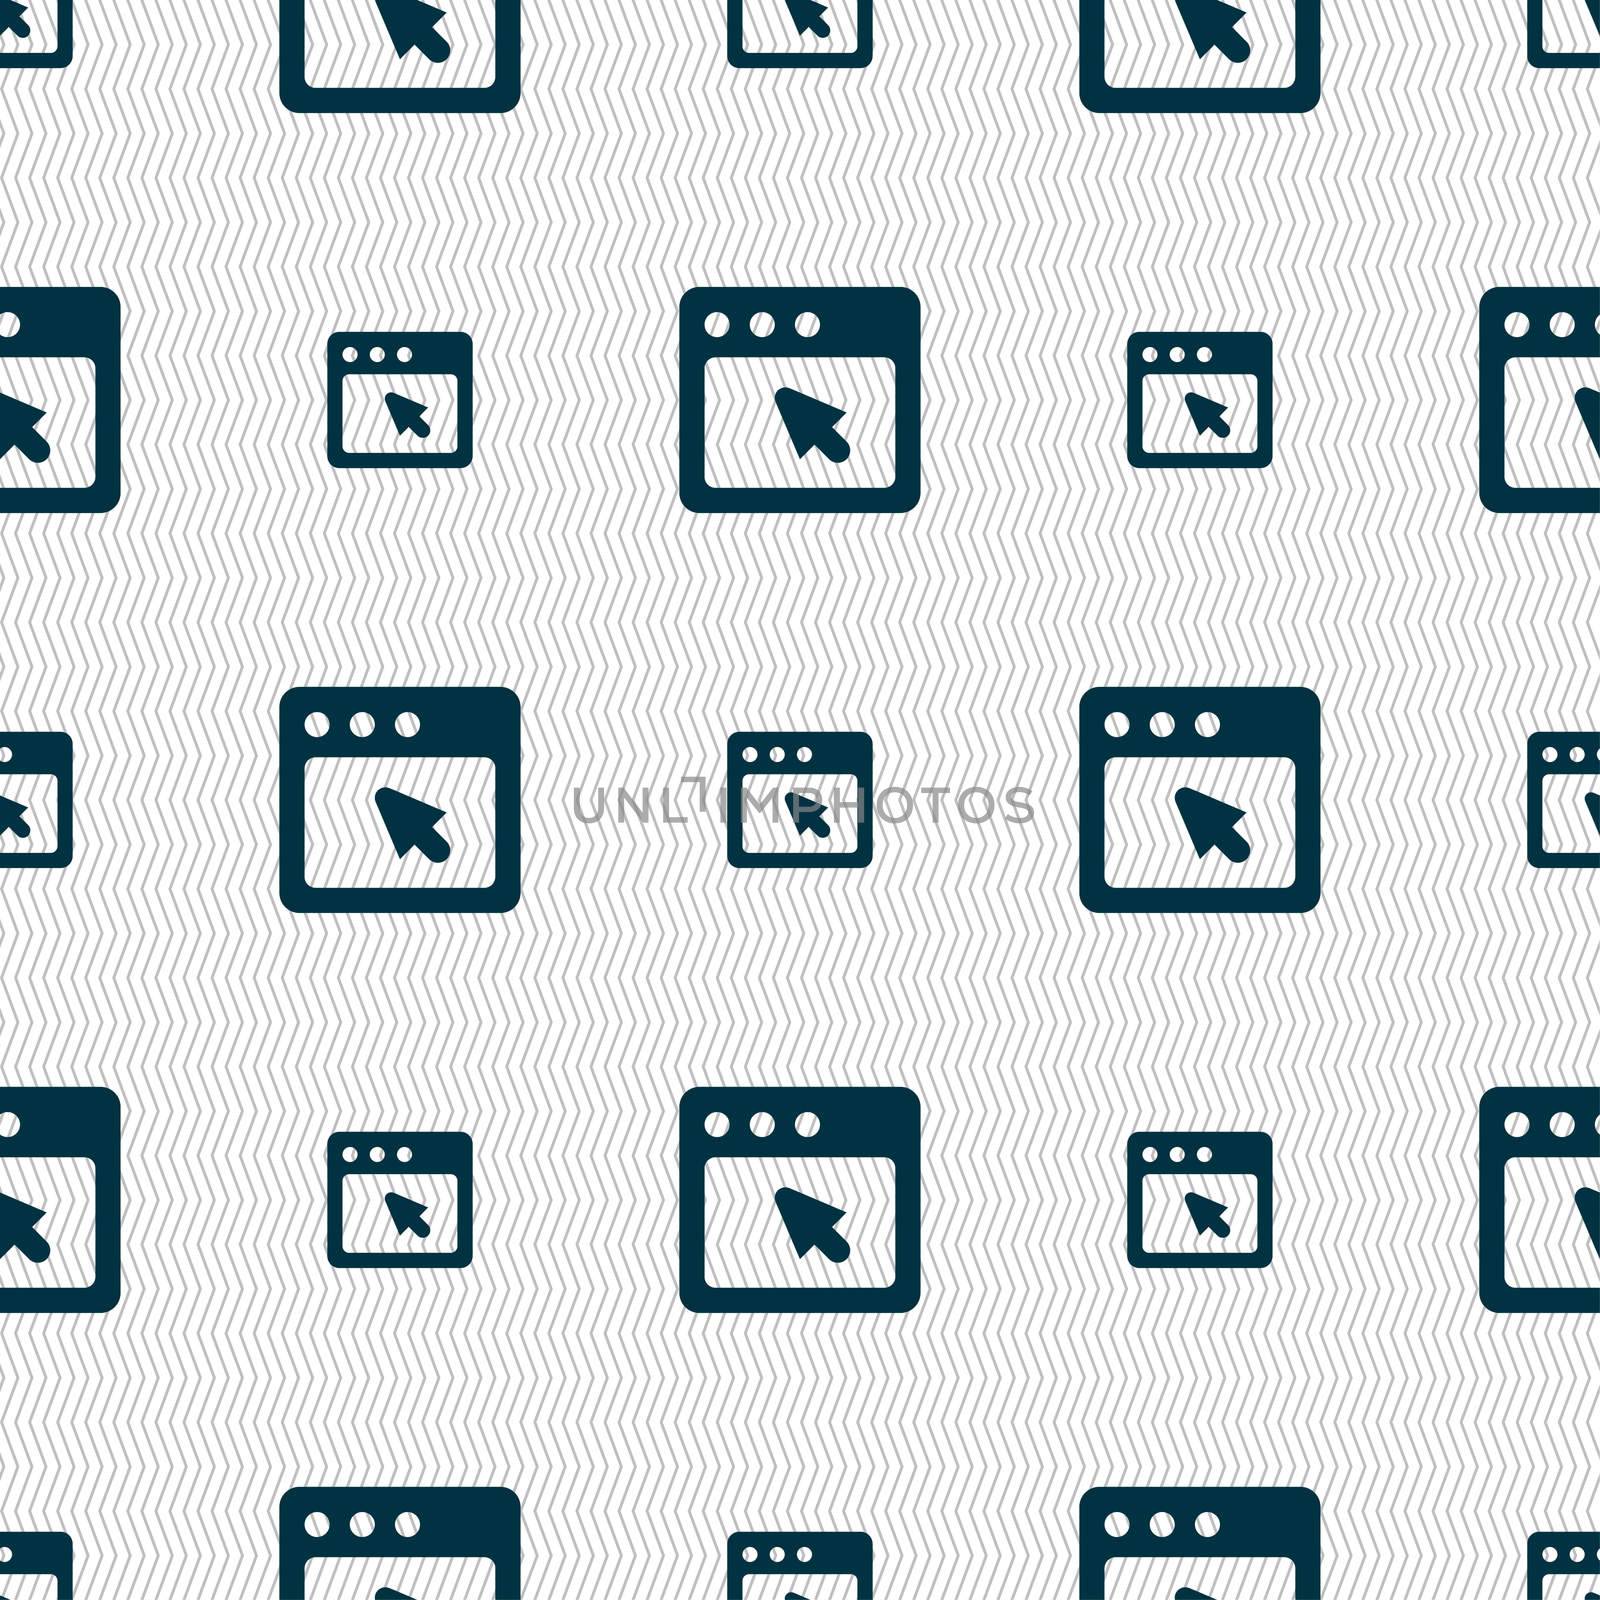 the dialog box icon sign. Seamless pattern with geometric texture. illustration